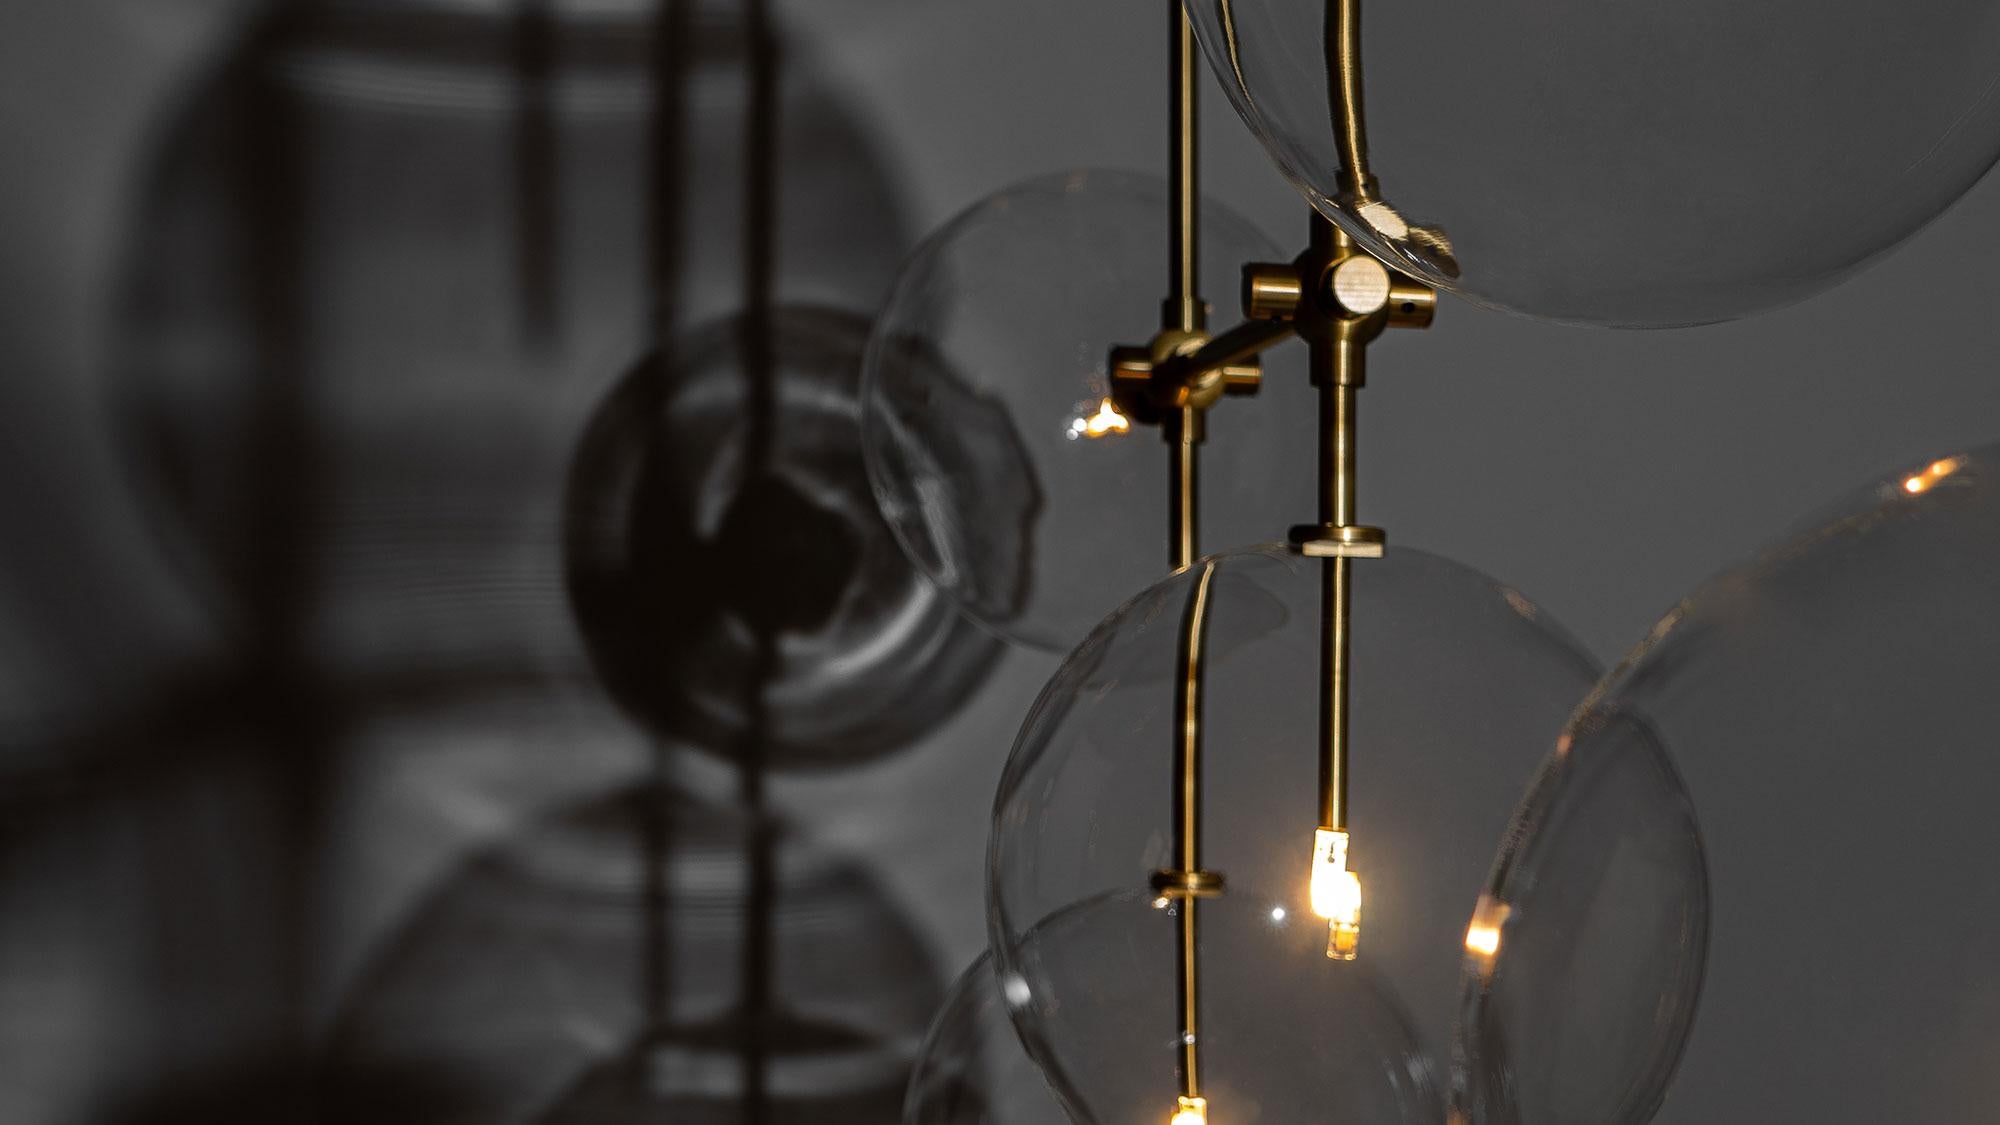 An array of ethereal glass globes floats weightlessly around a right-angled geometric lattice. The mouth-blown spheres are positioned rotationally around the brass grid, a spatial design creating an architectural impression.

Available in our